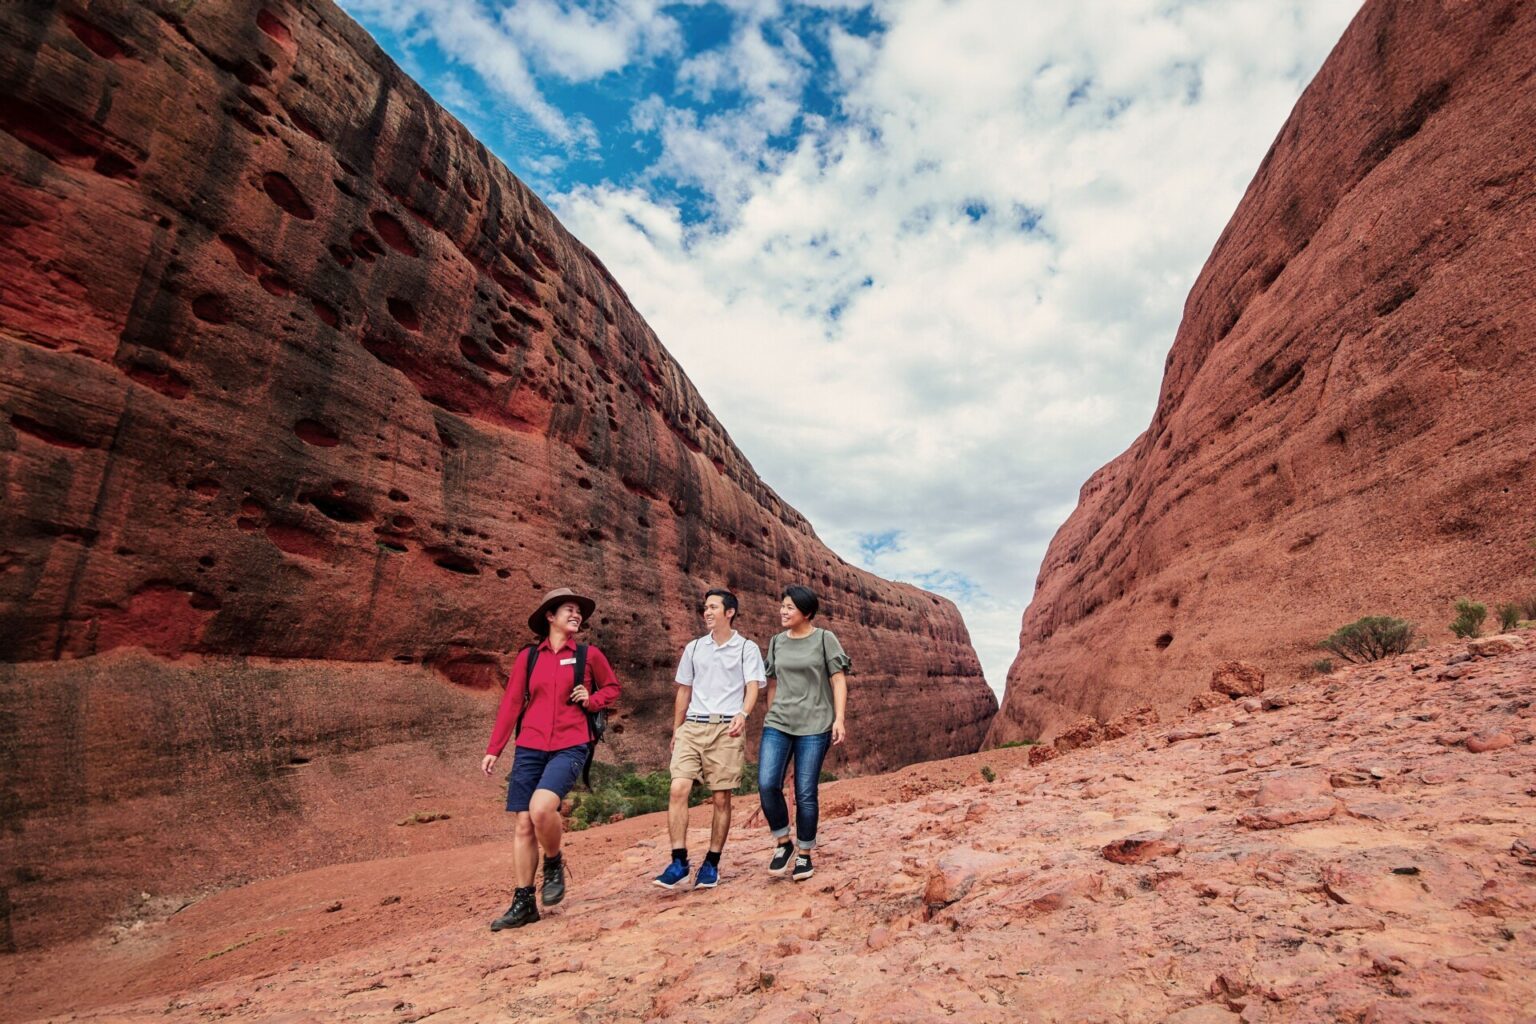 A tour guide walks with two travellers through a red sandstone canyon beneath a blue sky and blanket of white clouds - Luxury Escapes